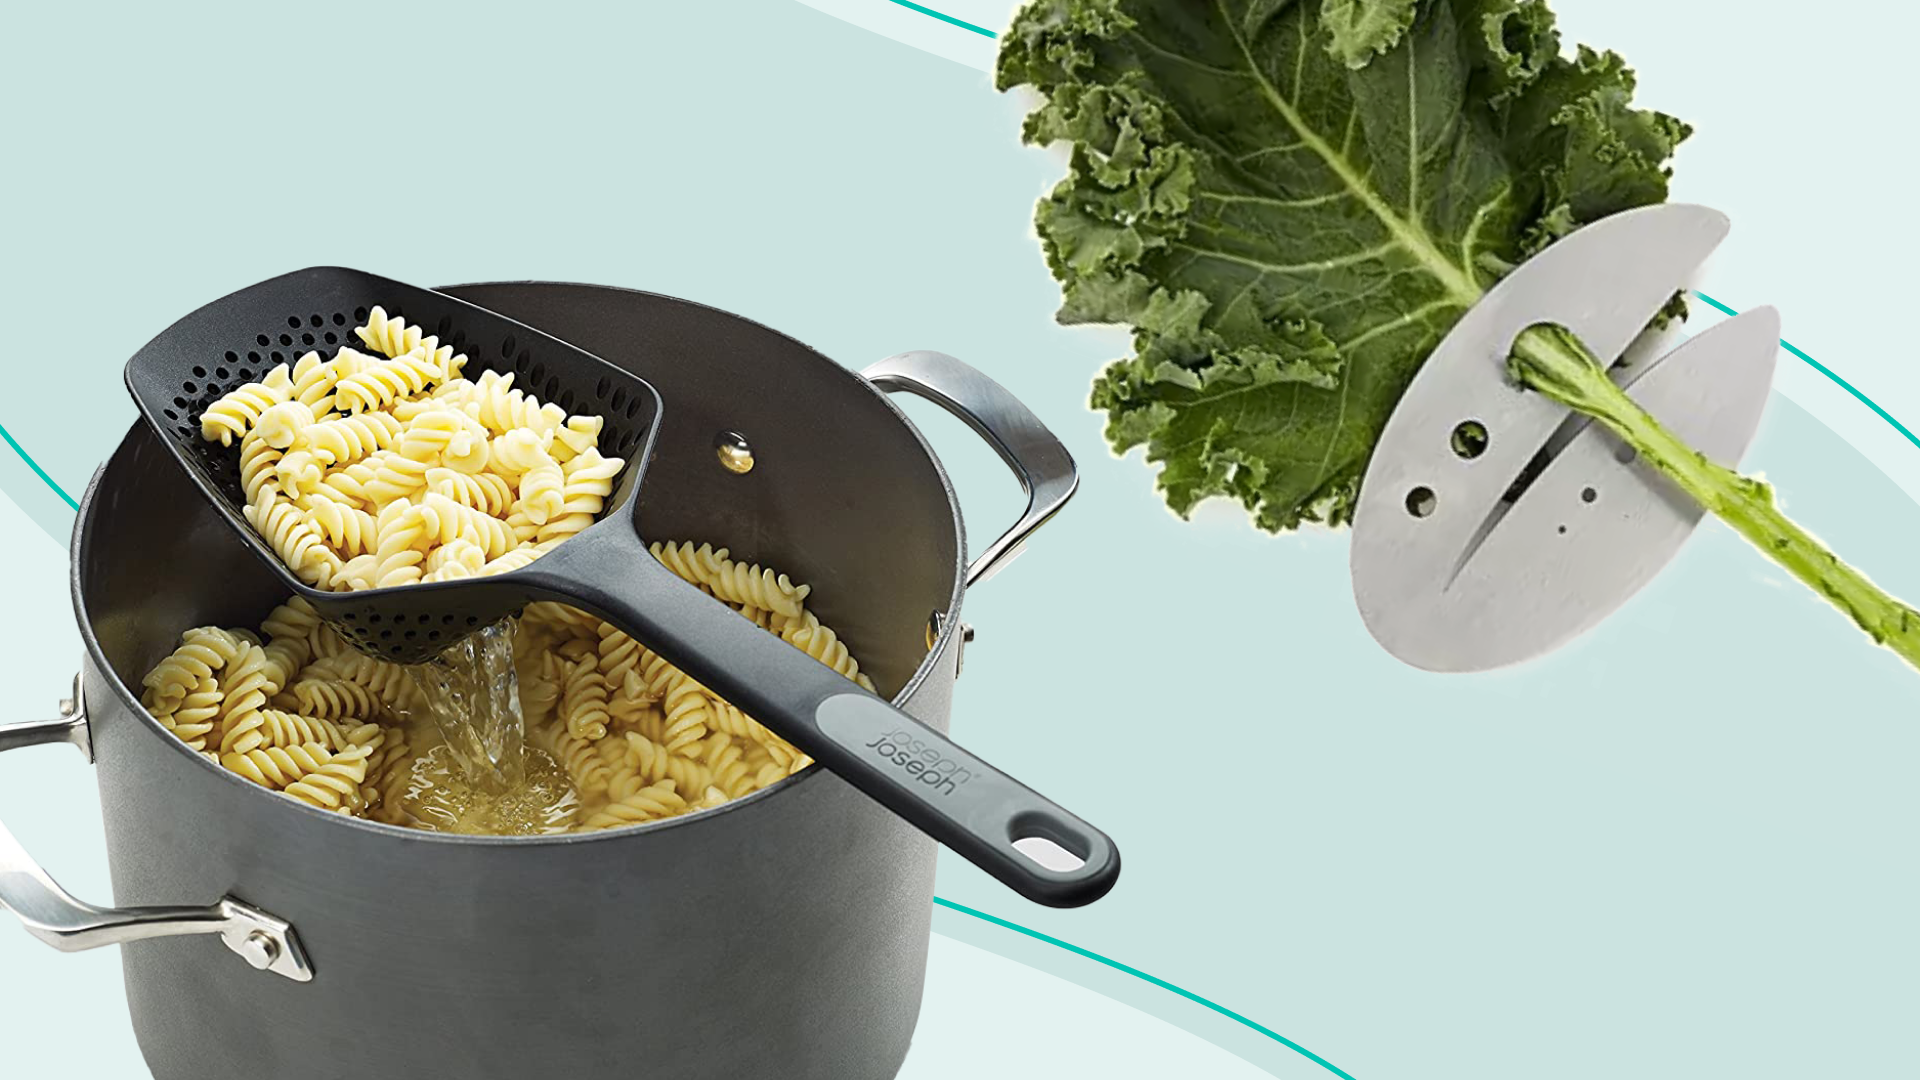 multifunctional kitchen products that do more than one job